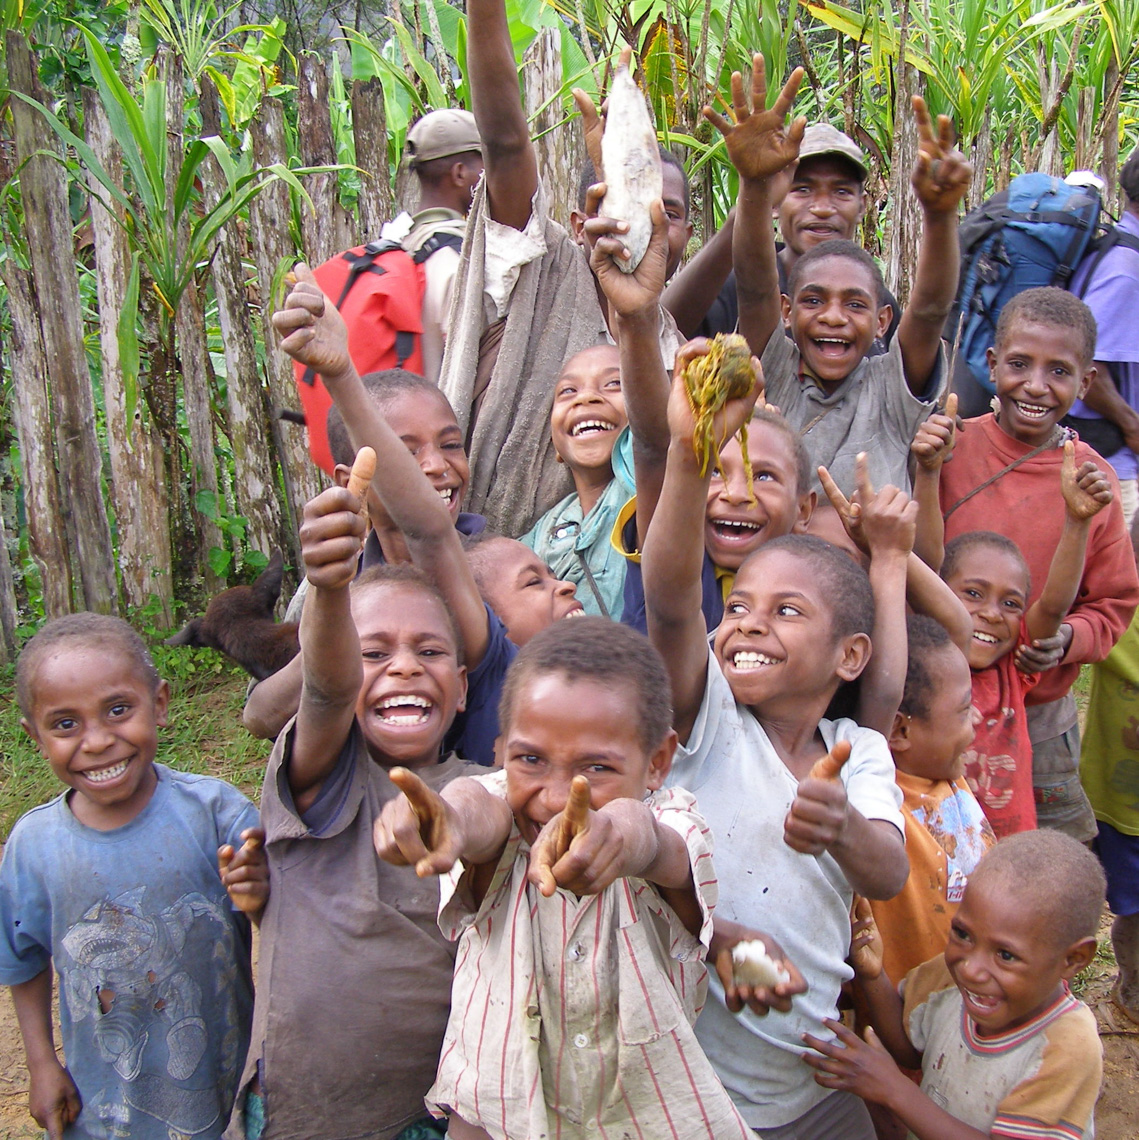 Stoked Kids, Morobe Province, Field Collecting New Guinea Art.